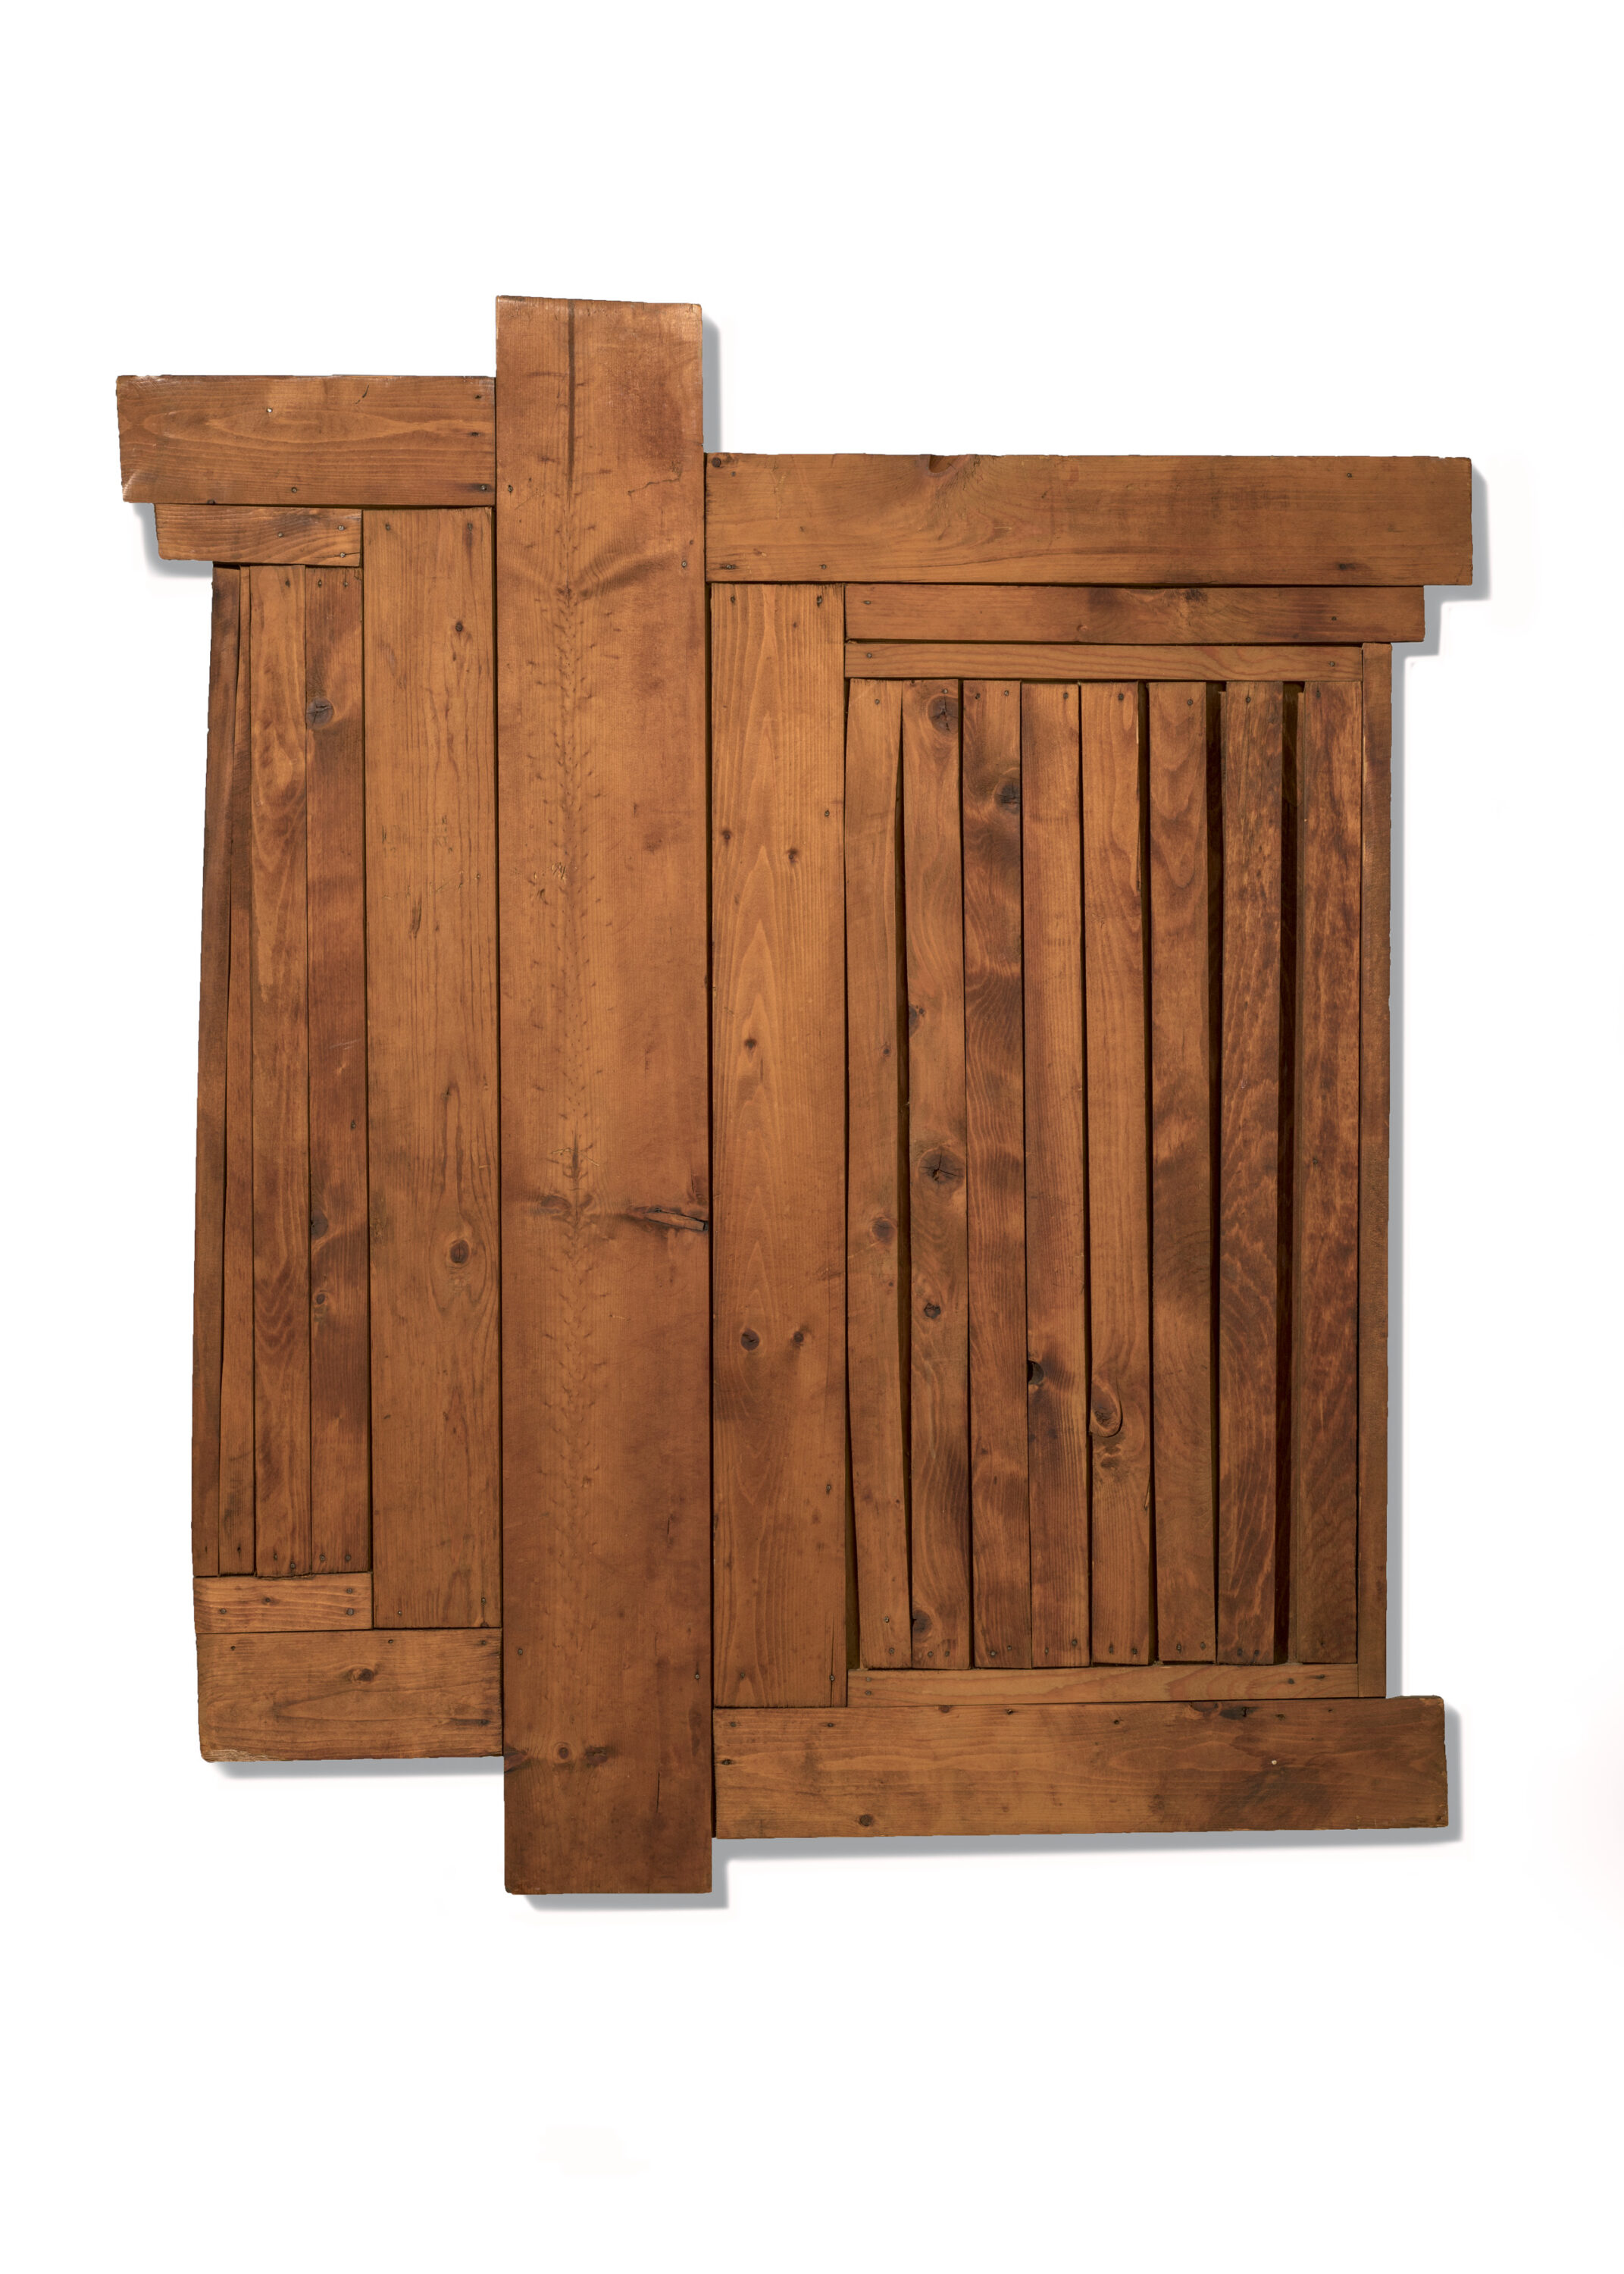 A square sculpture made out of planks of wood is hung against a white wall. The planks are hung vertically next to one another and come in differing widths. There are a few horizontal planks hung at the top and bottom of the piece, mimicking a border.